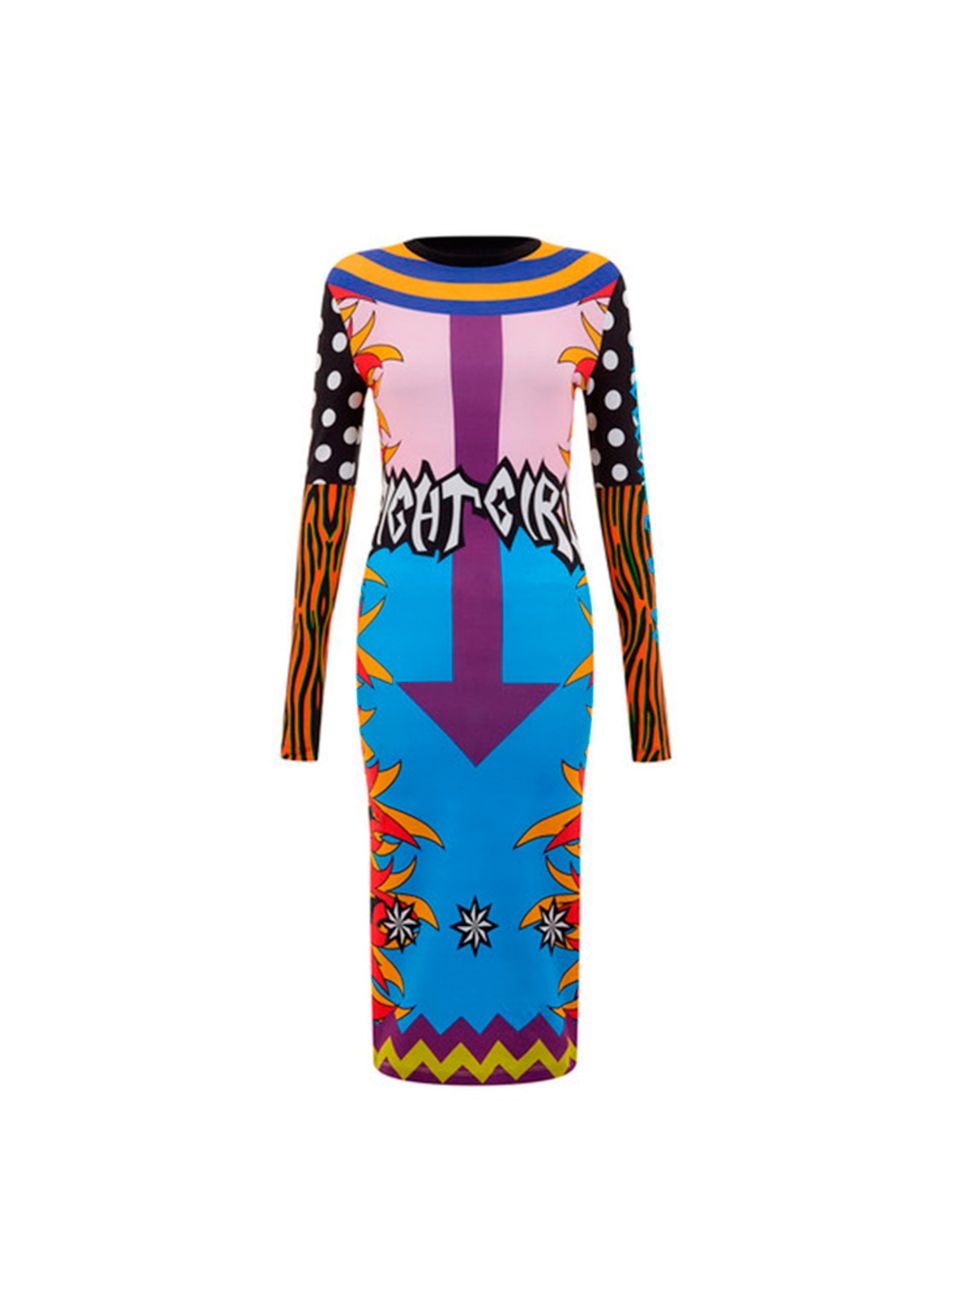 <p><a href="http://www.houseofholland.co.uk/products/flame-print-midi-dress" target="_blank">House of Holland</a> dress, £130</p>